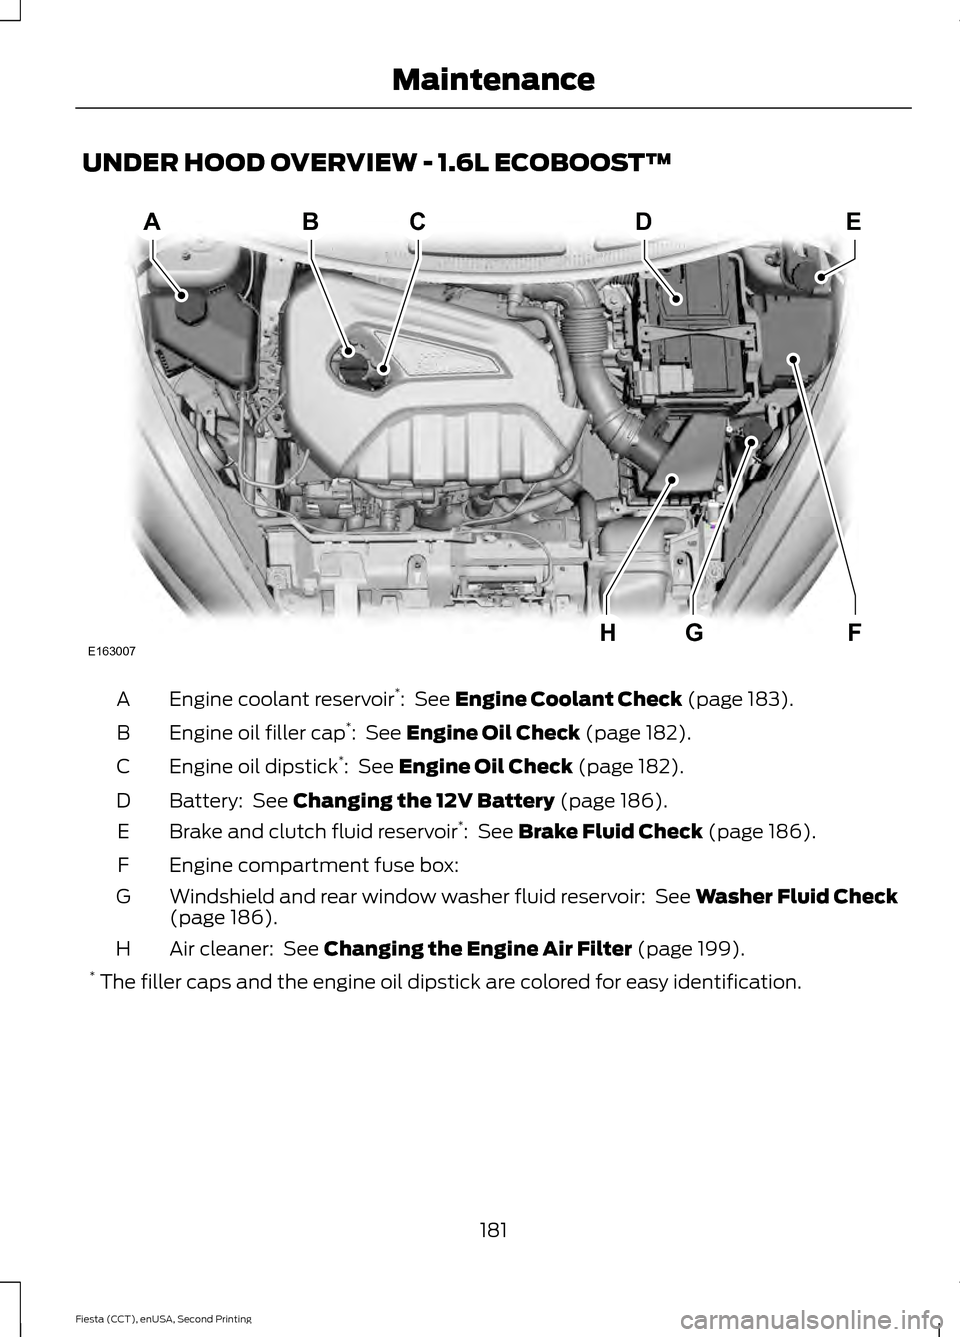 FORD FIESTA 2015 6.G Owners Manual UNDER HOOD OVERVIEW - 1.6L ECOBOOST™
Engine coolant reservoir
*
:  See Engine Coolant Check (page 183).
A
Engine oil filler cap *
: 
 See Engine Oil Check (page 182).
B
Engine oil dipstick *
: 
 See